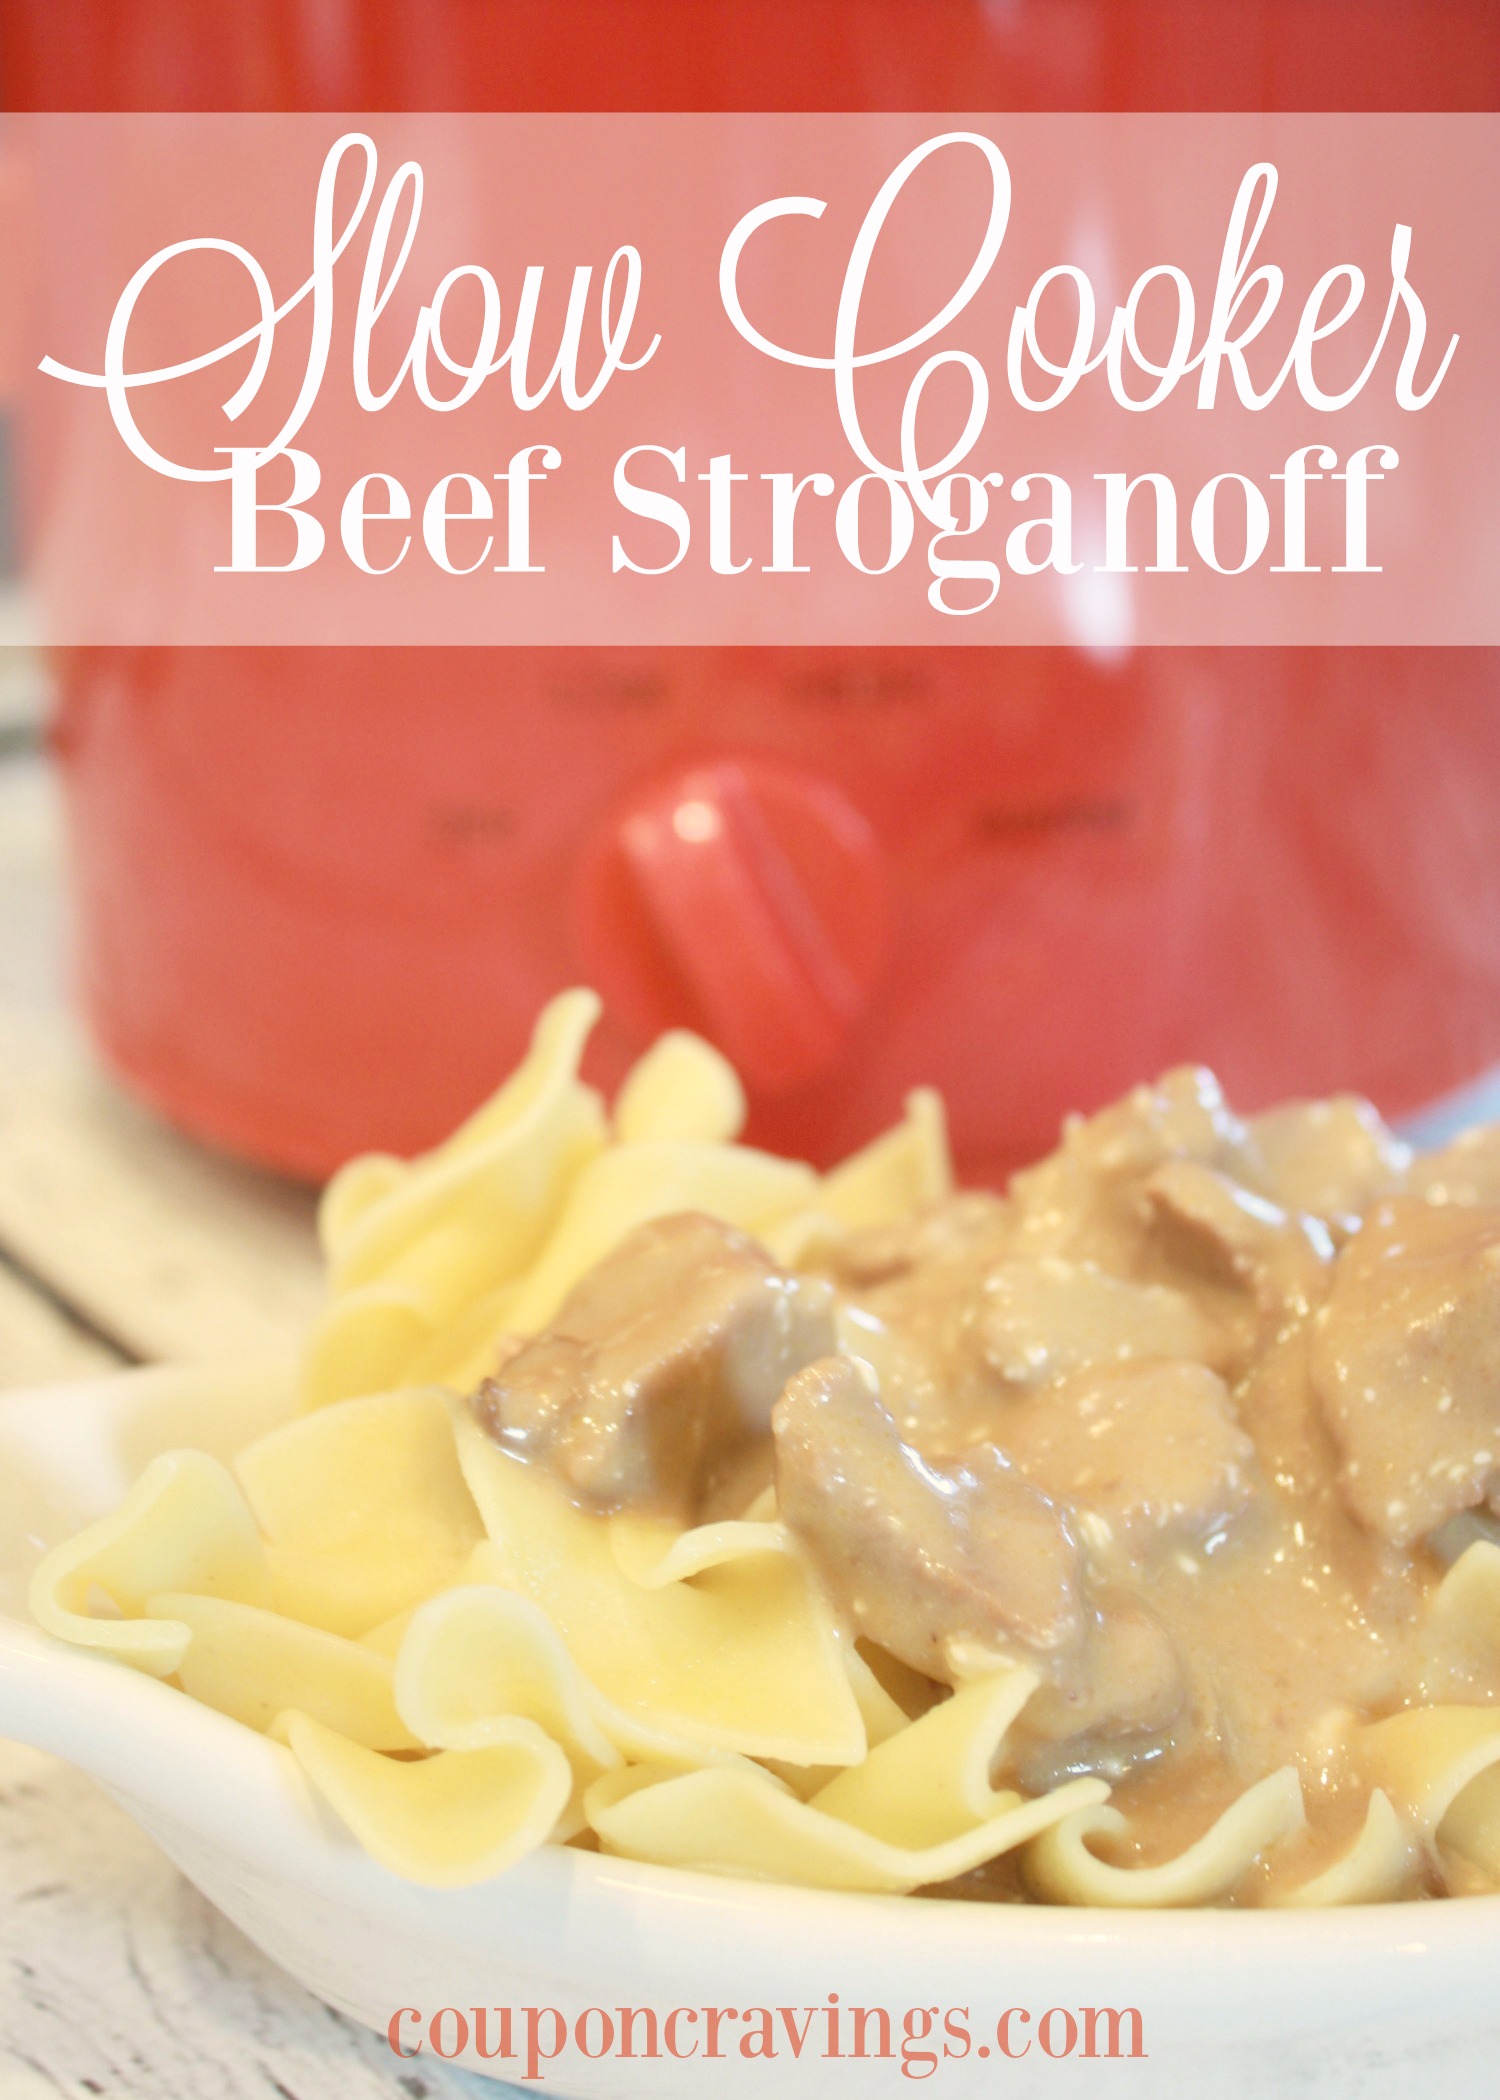 Slow Cooker Beef Stroganoff ~ An easy crock pot meal featuring tender beef and hearty mushrooms in a sour cream sauce. This is an easy weeknight meal to serve too, as most of the cooking is done while you are away. The best kind of weeknight dinner recipes!